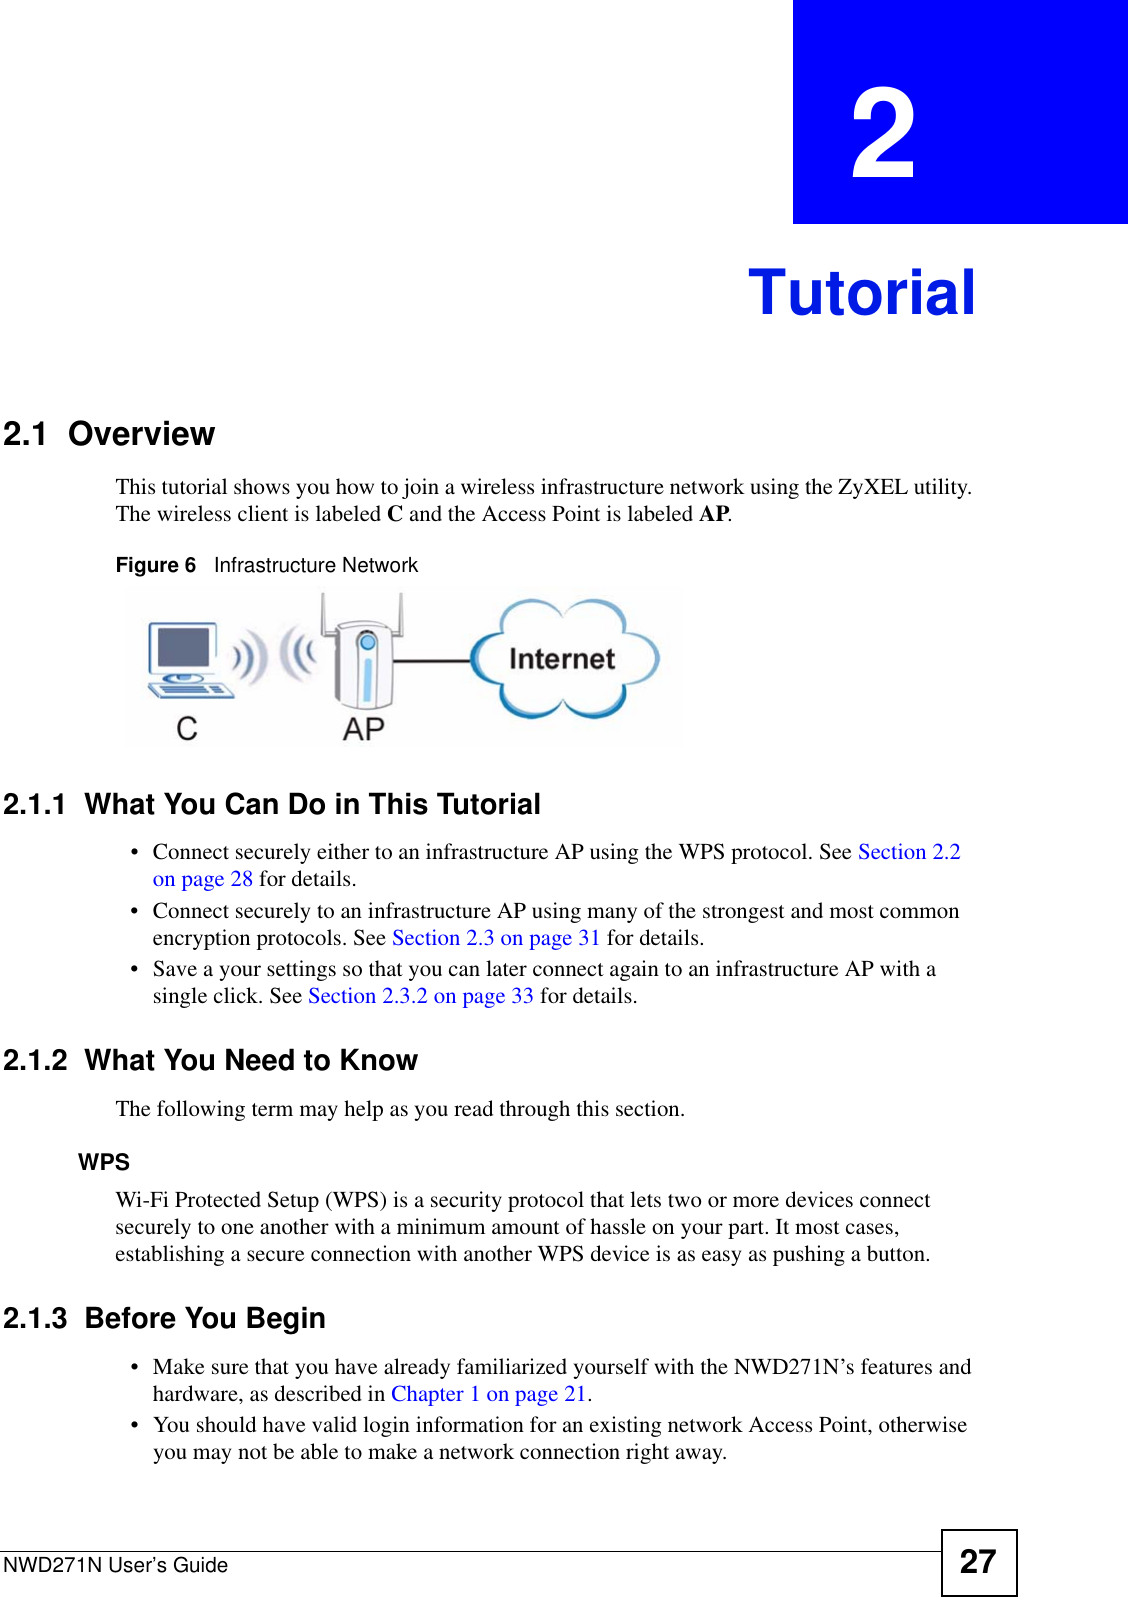 NWD271N User’s Guide 27CHAPTER  2 Tutorial2.1  OverviewThis tutorial shows you how to join a wireless infrastructure network using the ZyXEL utility. The wireless client is labeled C and the Access Point is labeled AP.Figure 6   Infrastructure Network2.1.1  What You Can Do in This Tutorial• Connect securely either to an infrastructure AP using the WPS protocol. See Section 2.2 on page 28 for details.• Connect securely to an infrastructure AP using many of the strongest and most common encryption protocols. See Section 2.3 on page 31 for details.• Save a your settings so that you can later connect again to an infrastructure AP with a single click. See Section 2.3.2 on page 33 for details.2.1.2  What You Need to KnowThe following term may help as you read through this section.WPSWi-Fi Protected Setup (WPS) is a security protocol that lets two or more devices connect securely to one another with a minimum amount of hassle on your part. It most cases, establishing a secure connection with another WPS device is as easy as pushing a button.2.1.3  Before You Begin• Make sure that you have already familiarized yourself with the NWD271N’s features and hardware, as described in Chapter 1 on page 21.• You should have valid login information for an existing network Access Point, otherwise you may not be able to make a network connection right away.